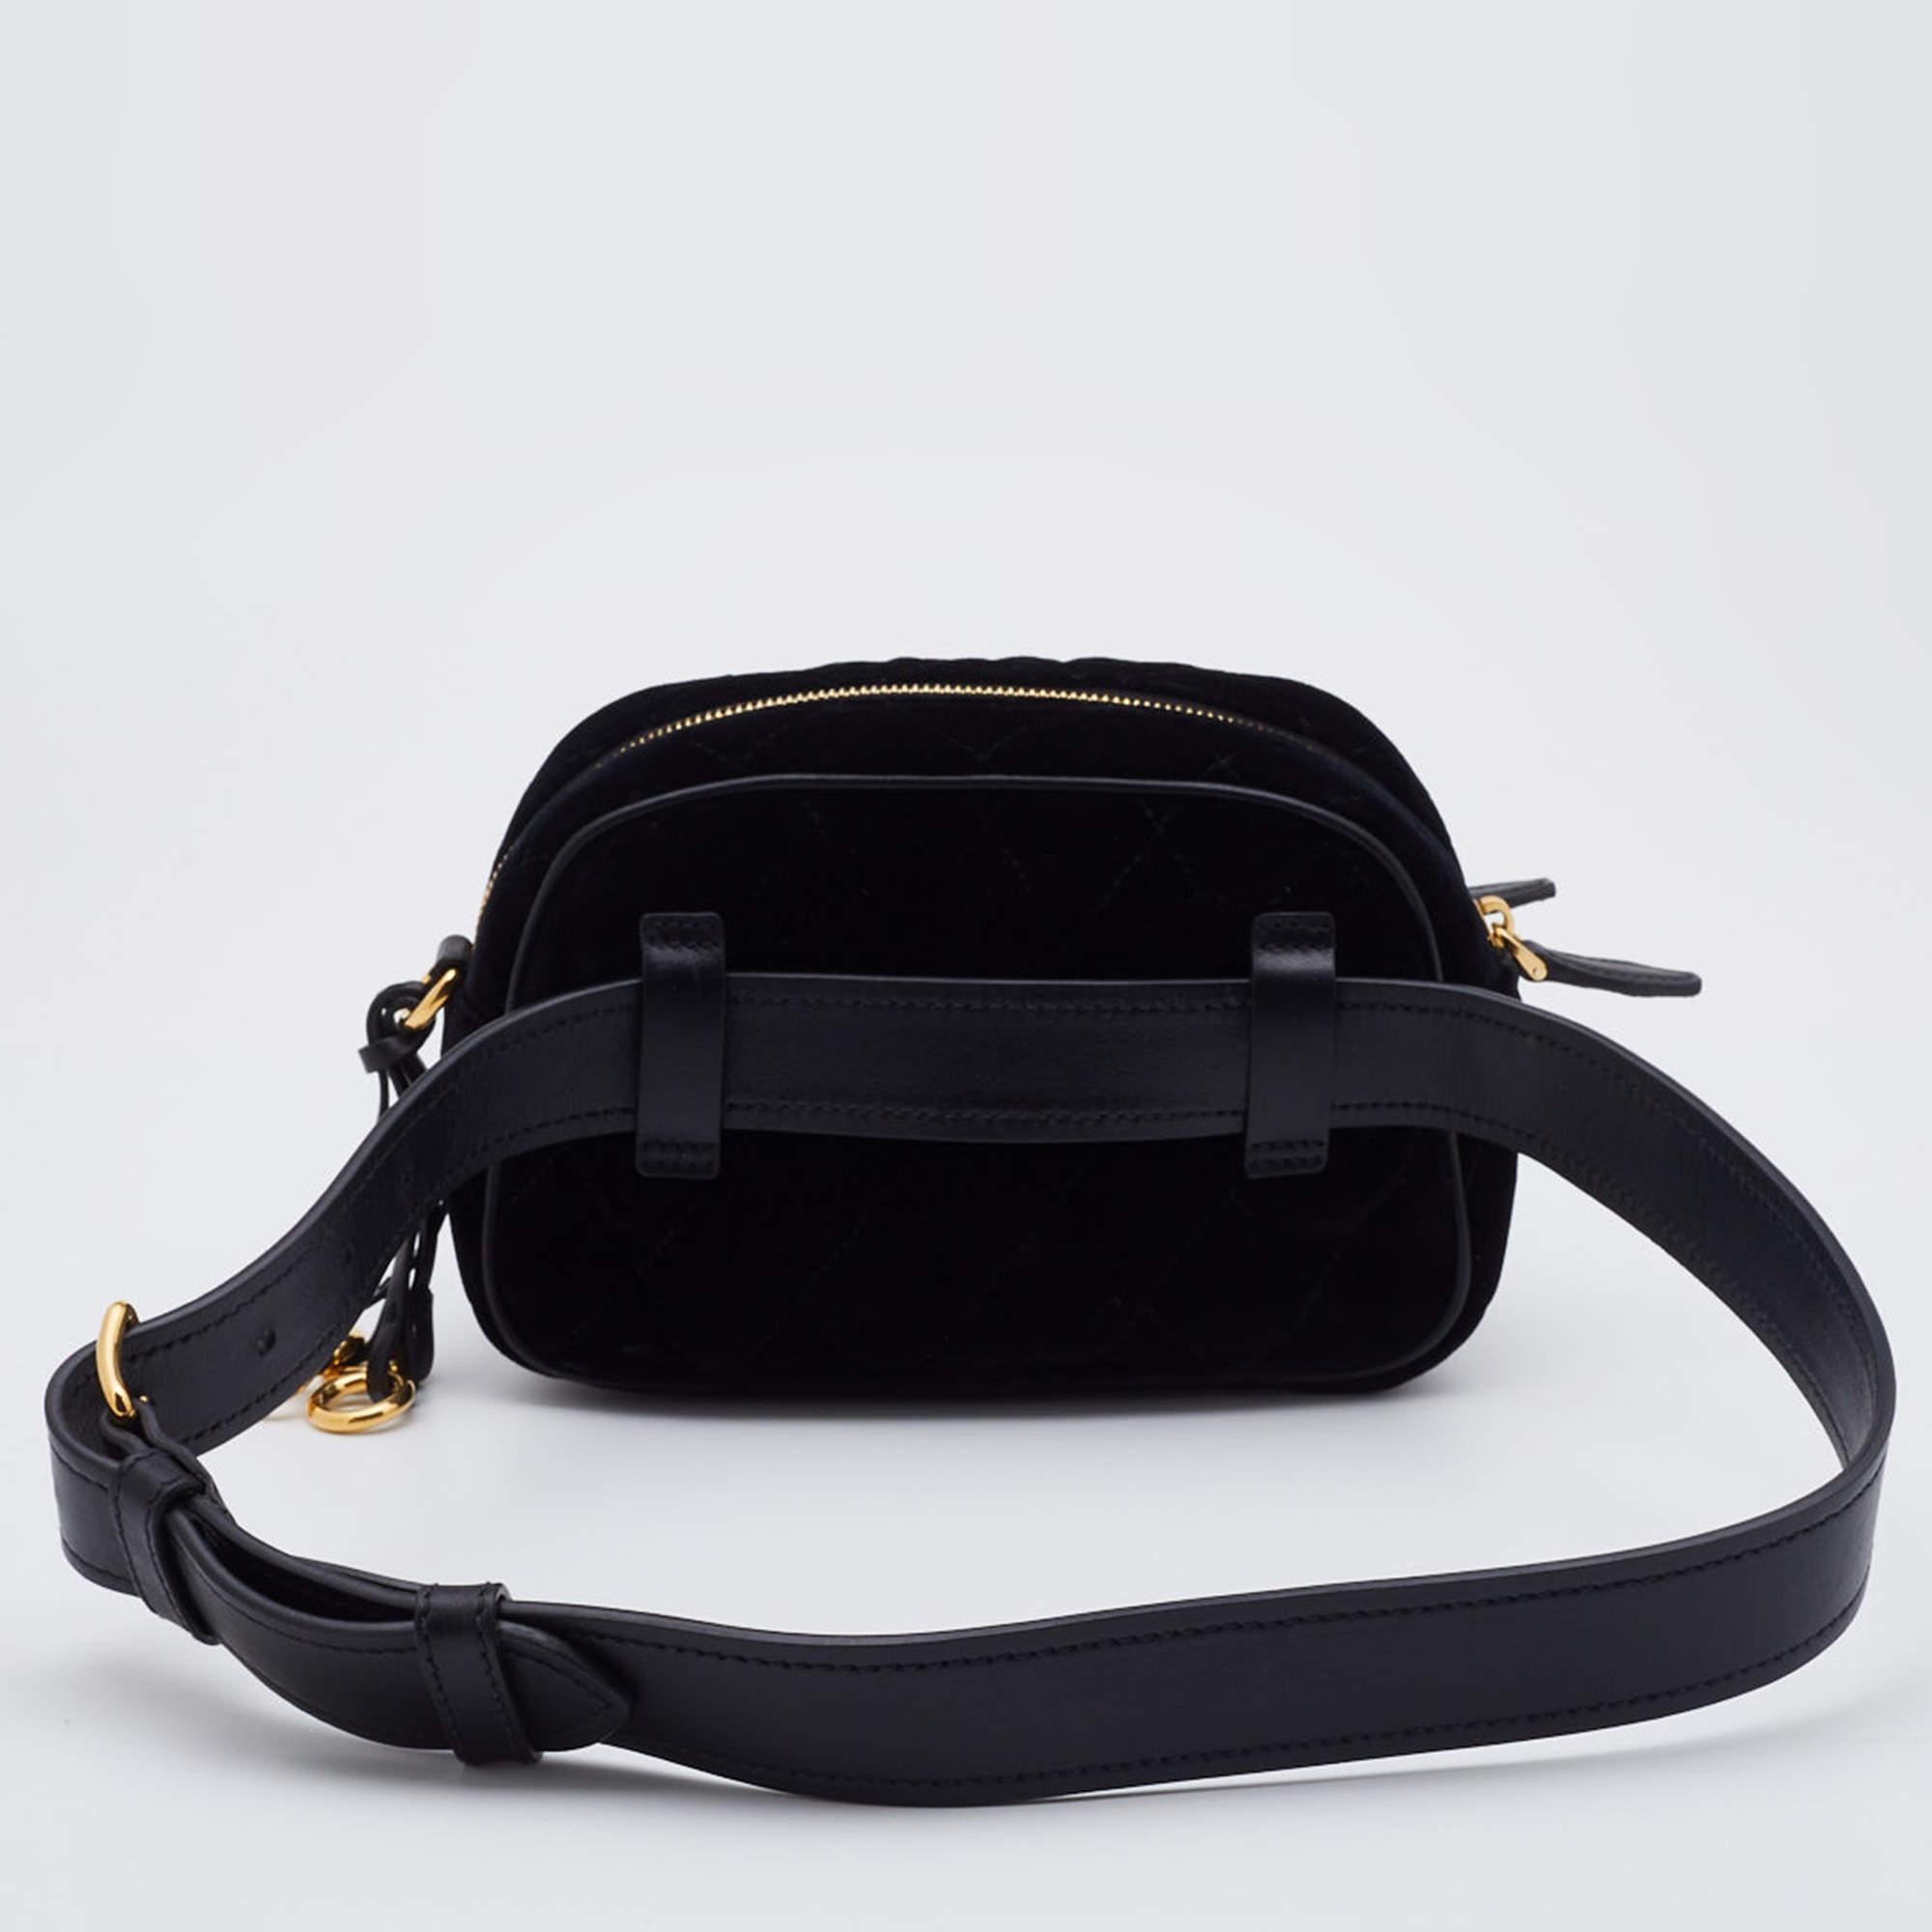 This Prada velvet & leather belt bag for women highlights convenient style in the best way. The bag has gold-tone ring details, a front brand logo, an adjustable belt strap, and an additional gold-tone chain.

